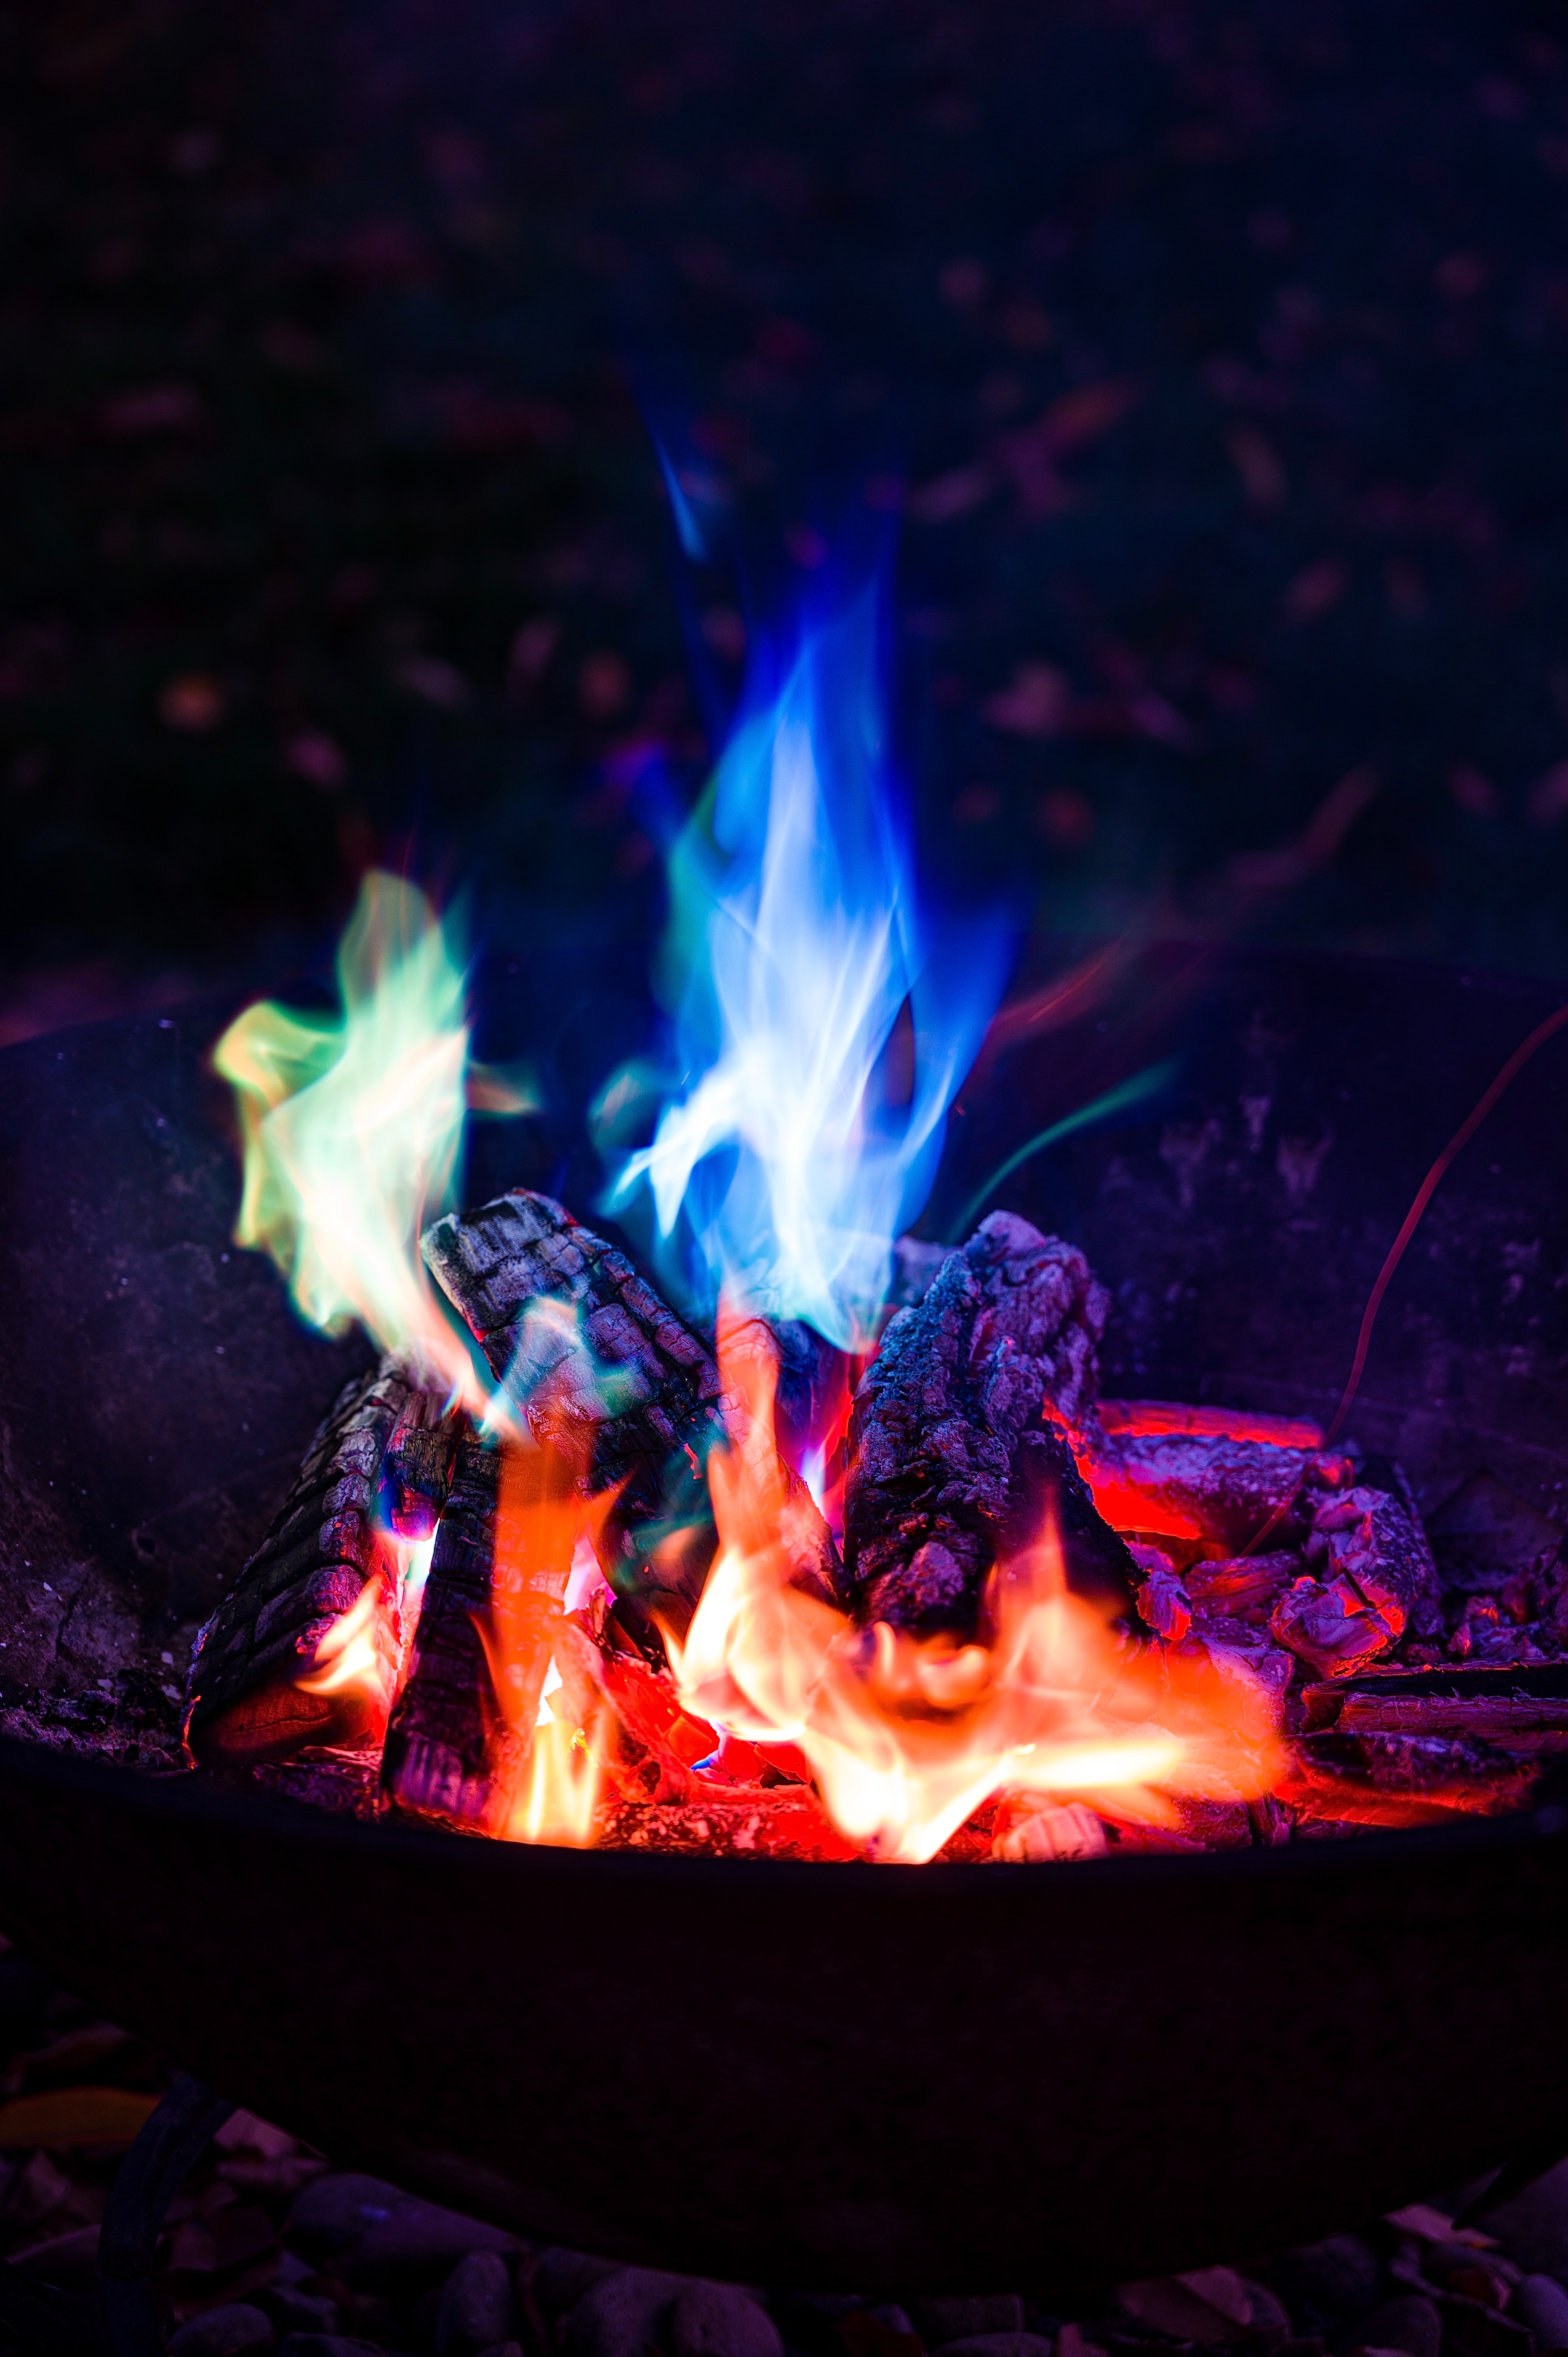 wallpapers camping, dark, bonfire, campsite, fire, night, flame